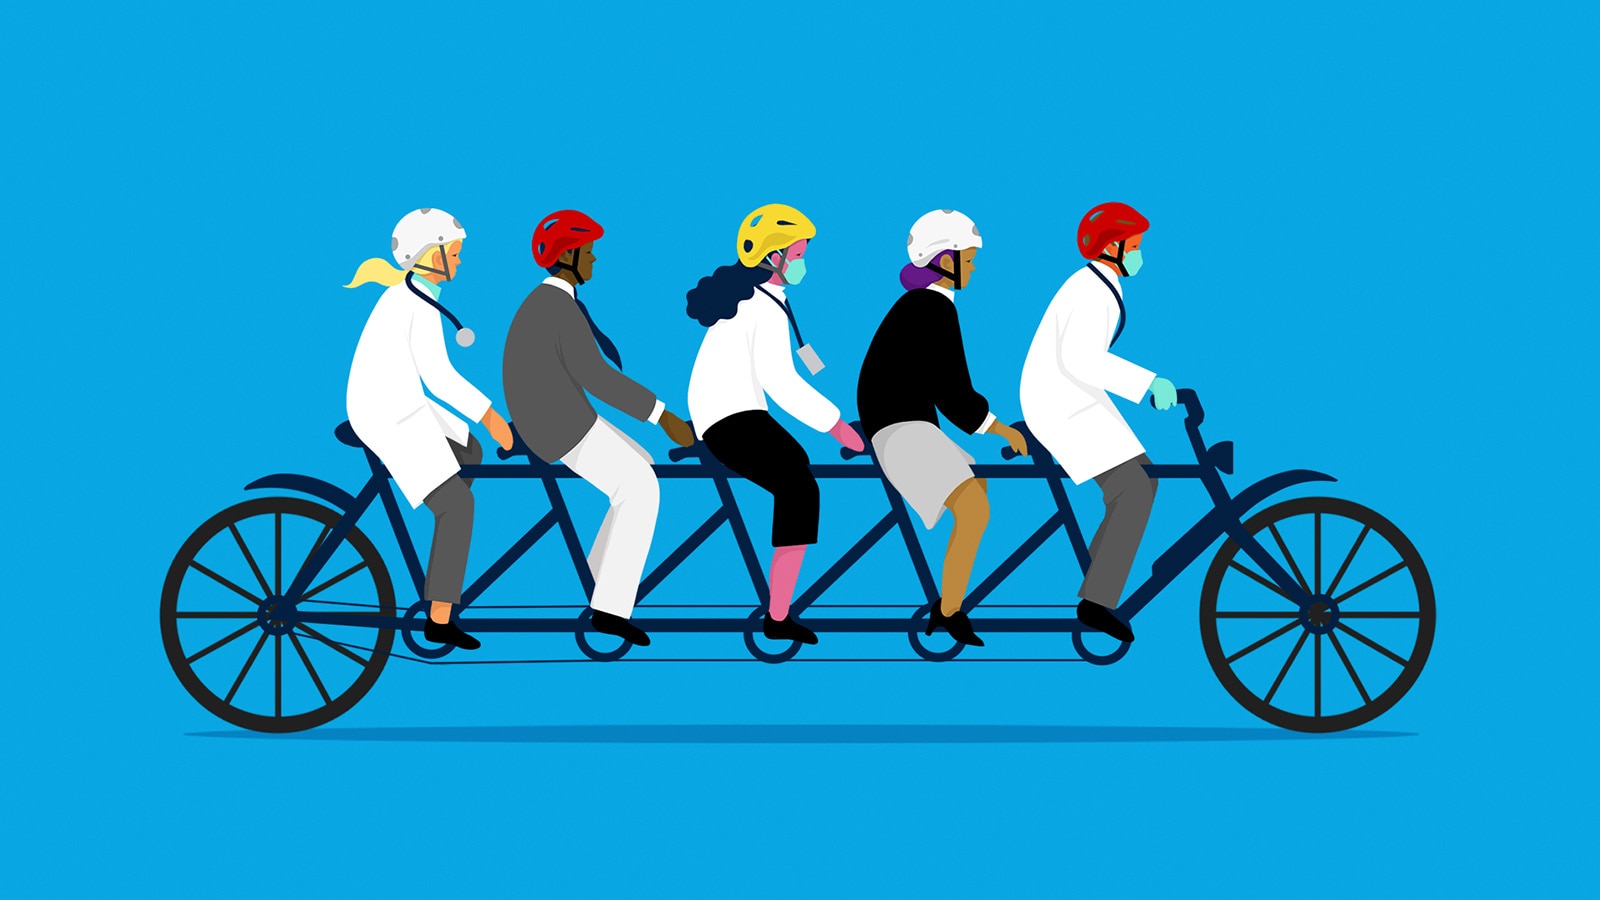 Graphic of five people riding a bike together in front of a blue background